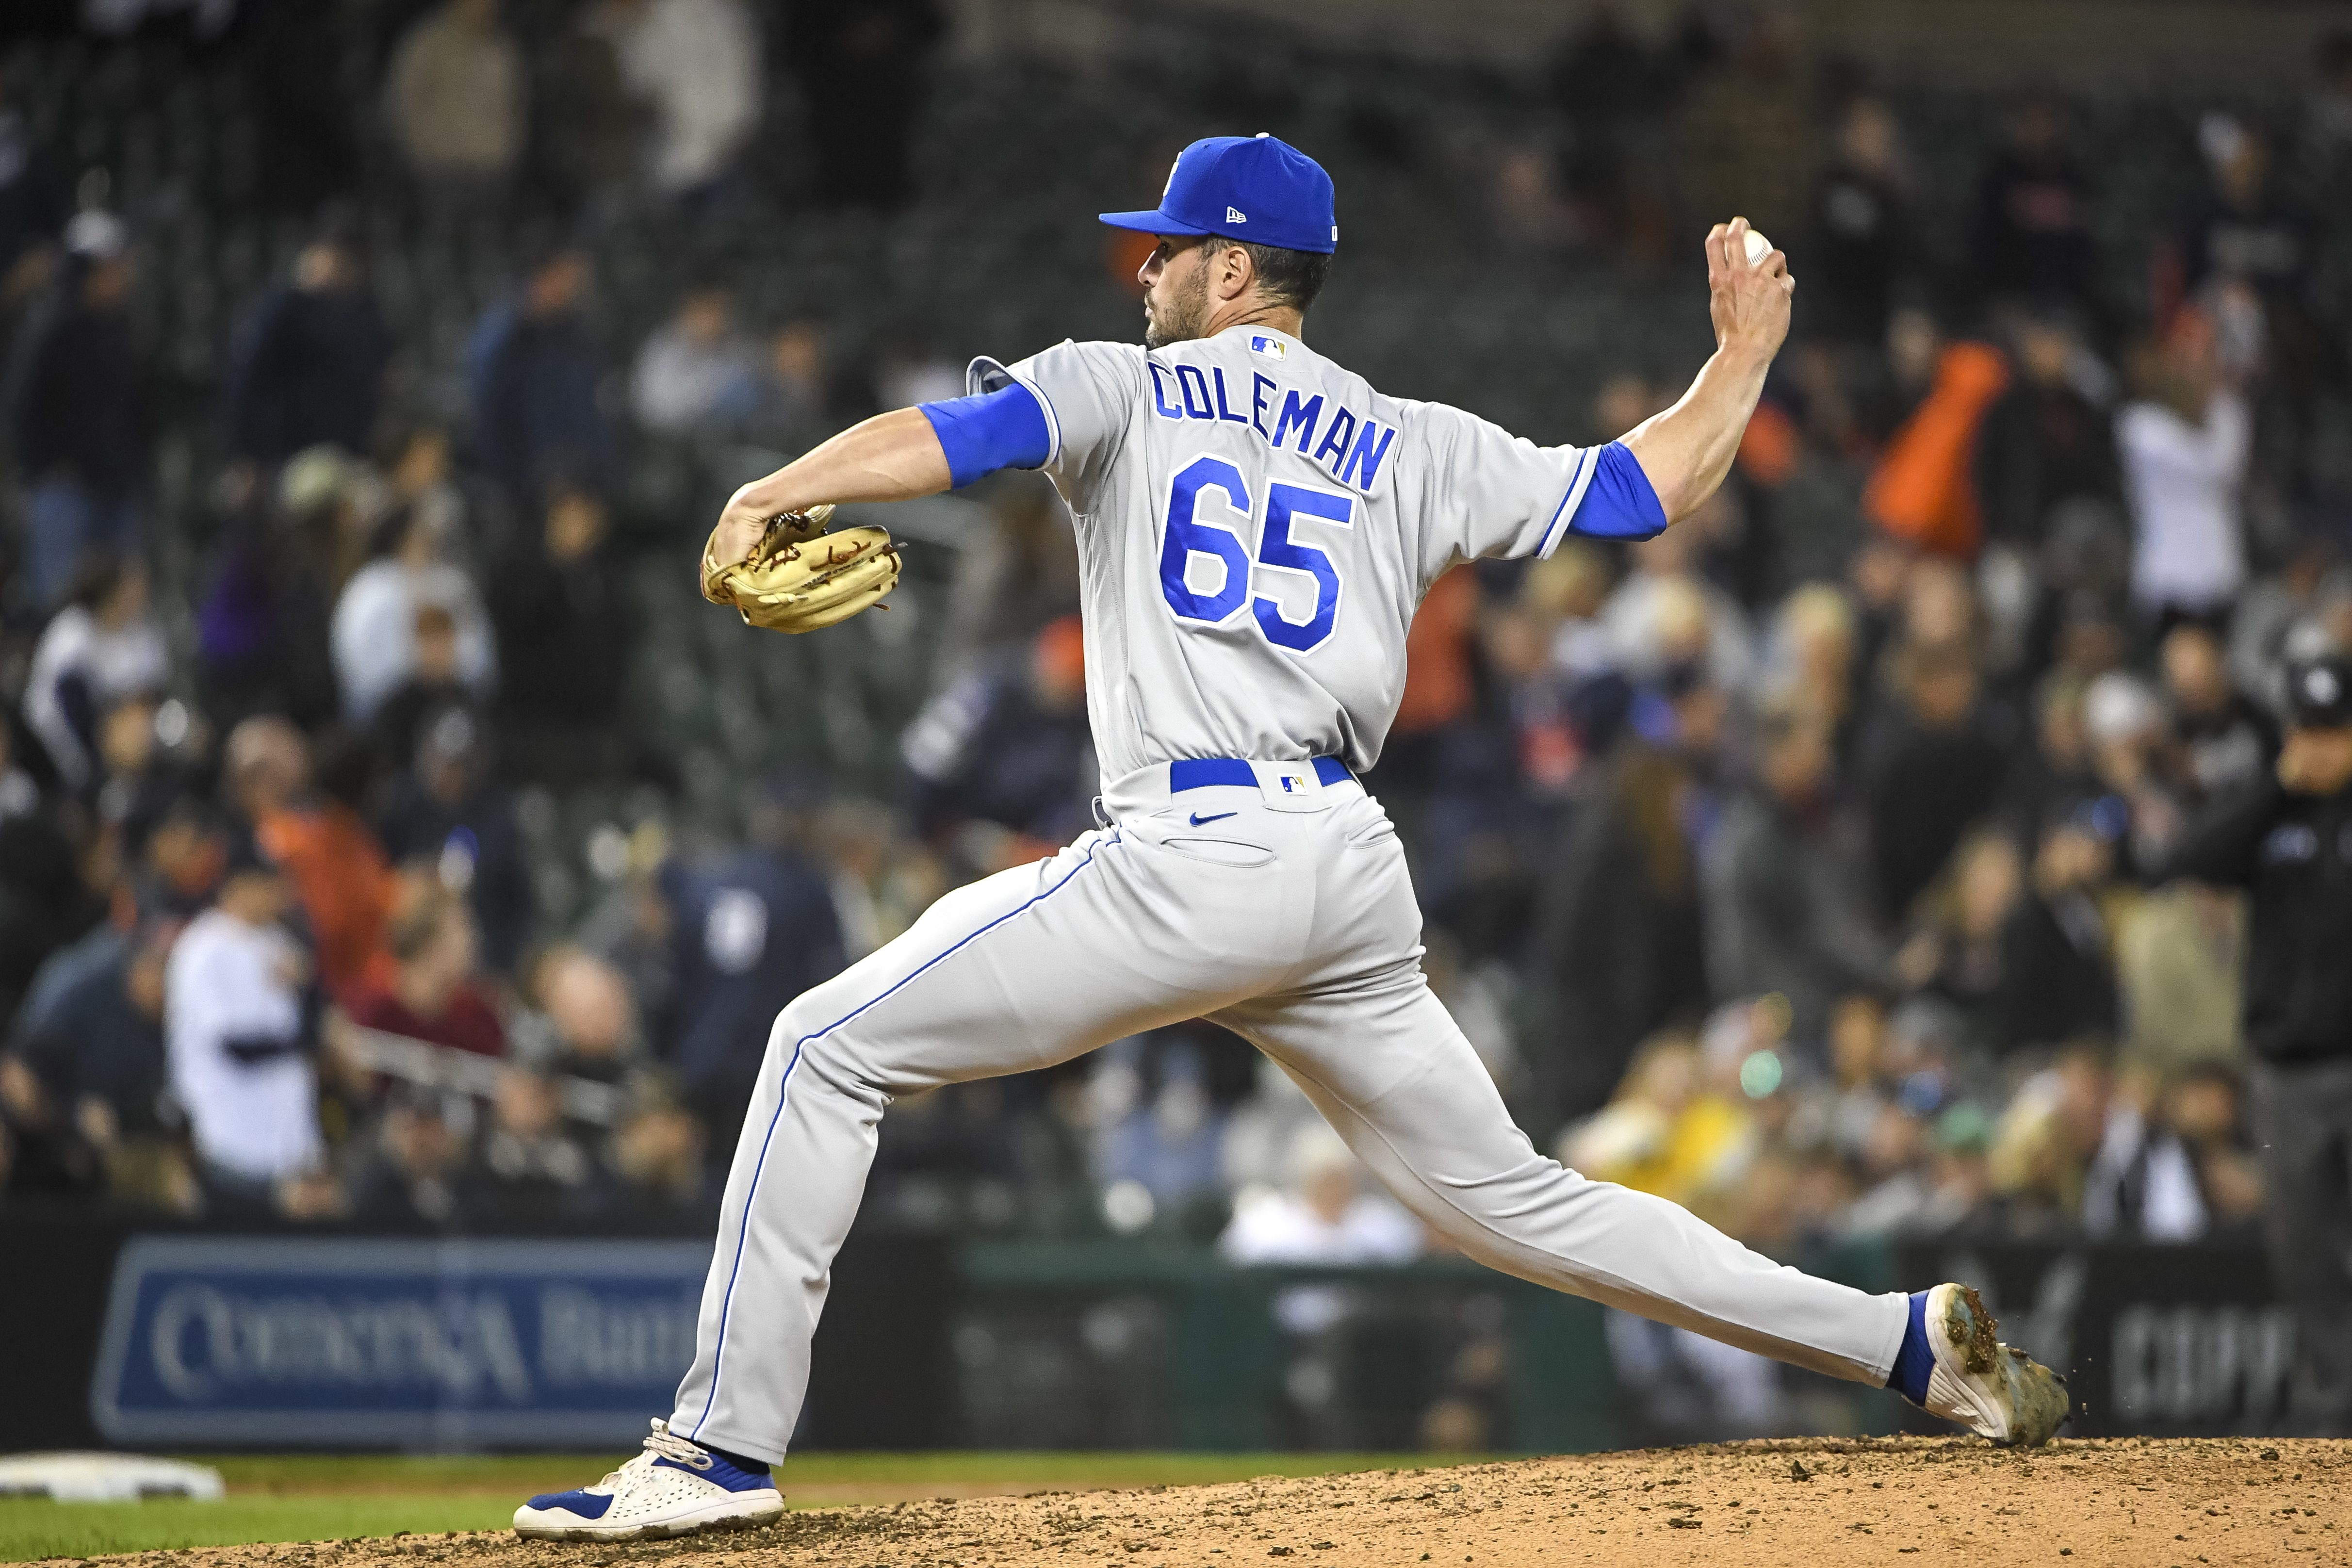 Dylan Coleman #65 of the Kansas City Royals delivers a pitch against the Detroit Tigers during the bottom of the eighth inning at Comerica Park on September 25, 2021 in Detroit, Michigan.